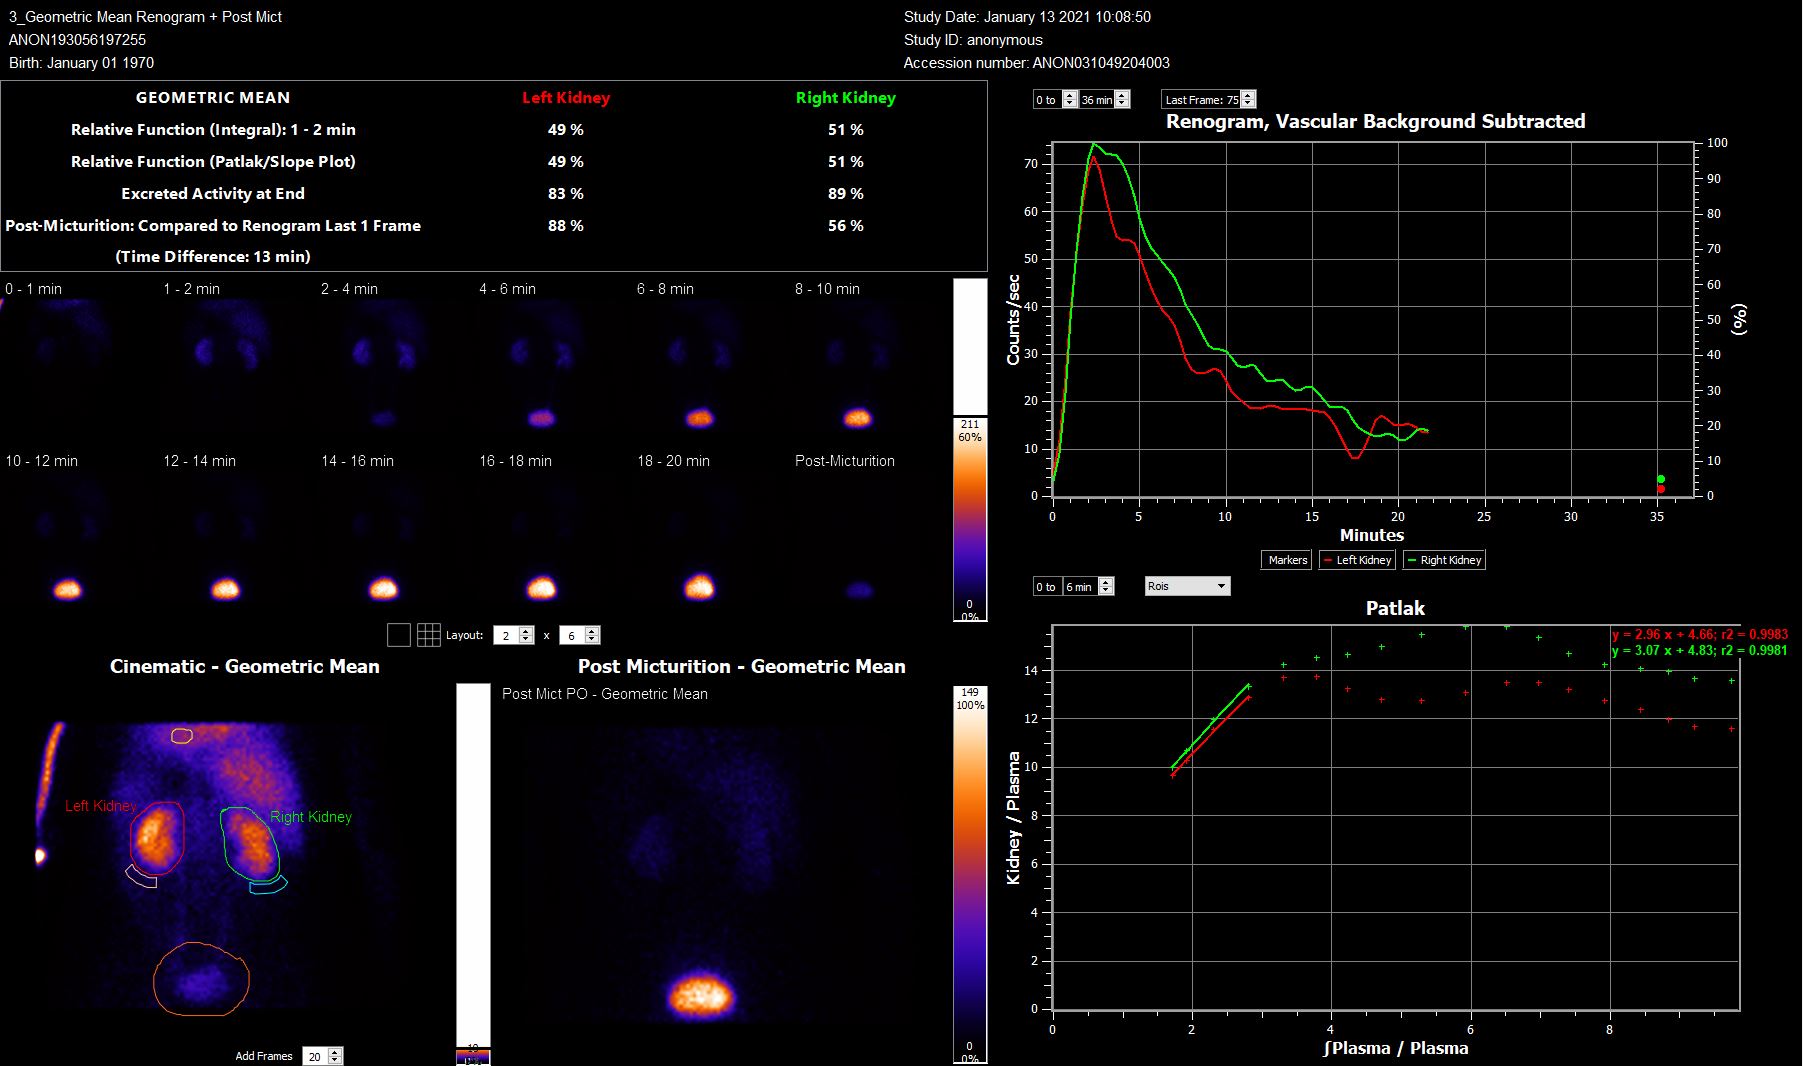 Renogram plus post-micturition static analysis with Patlak fit validation